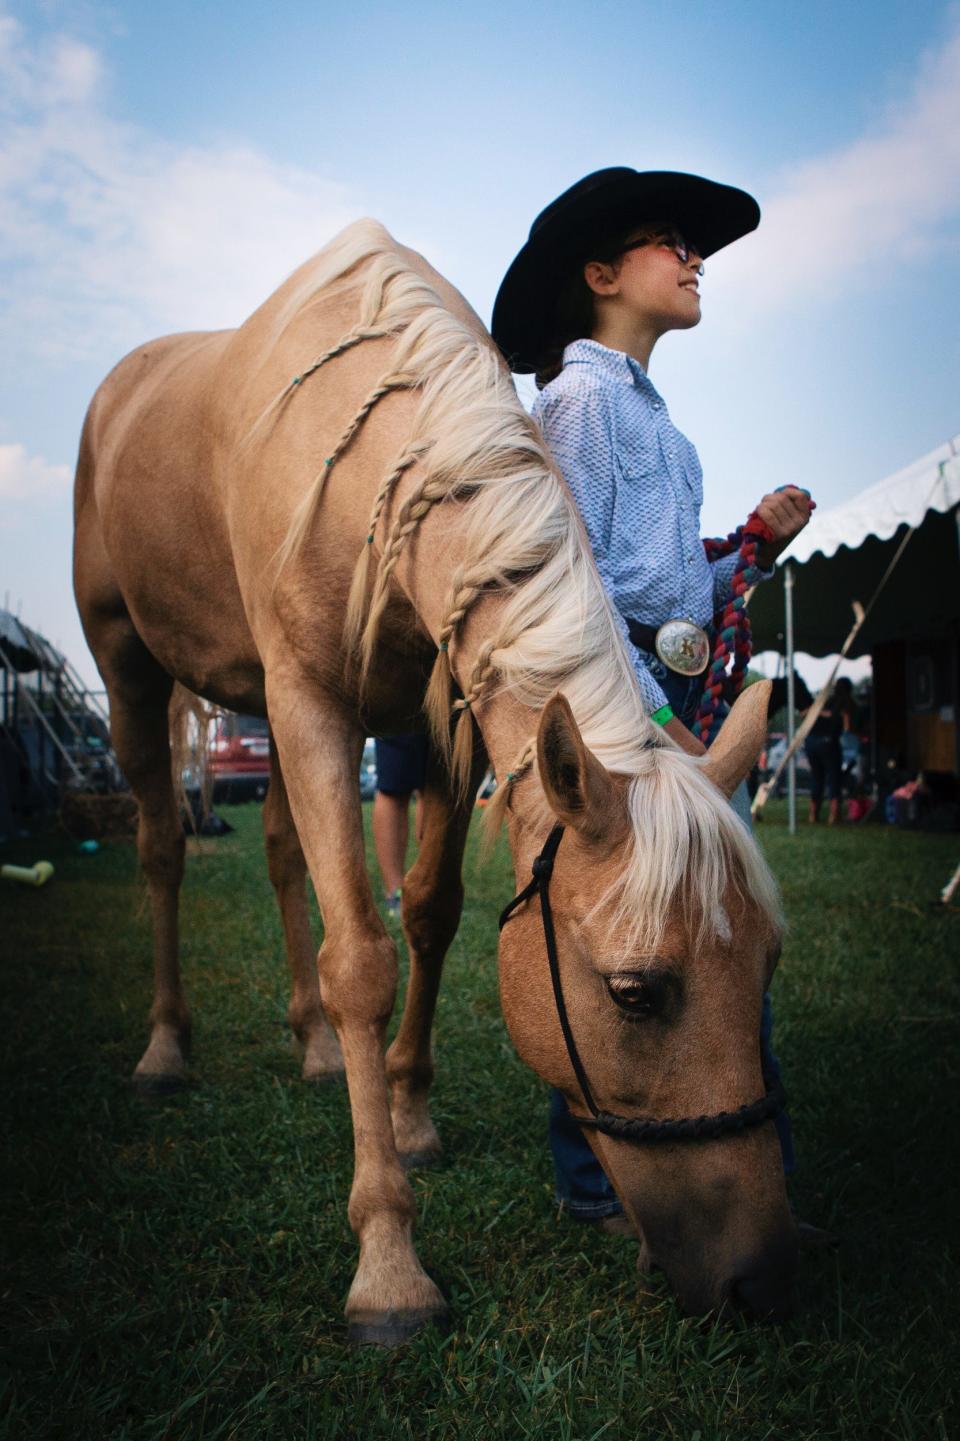 Irelyn Cotton, 9, poses for a portrait with her horse Charlie at the Hamilton County 4-H Community Fair in 2019. Cotton braided the mane of her horse before a competition.